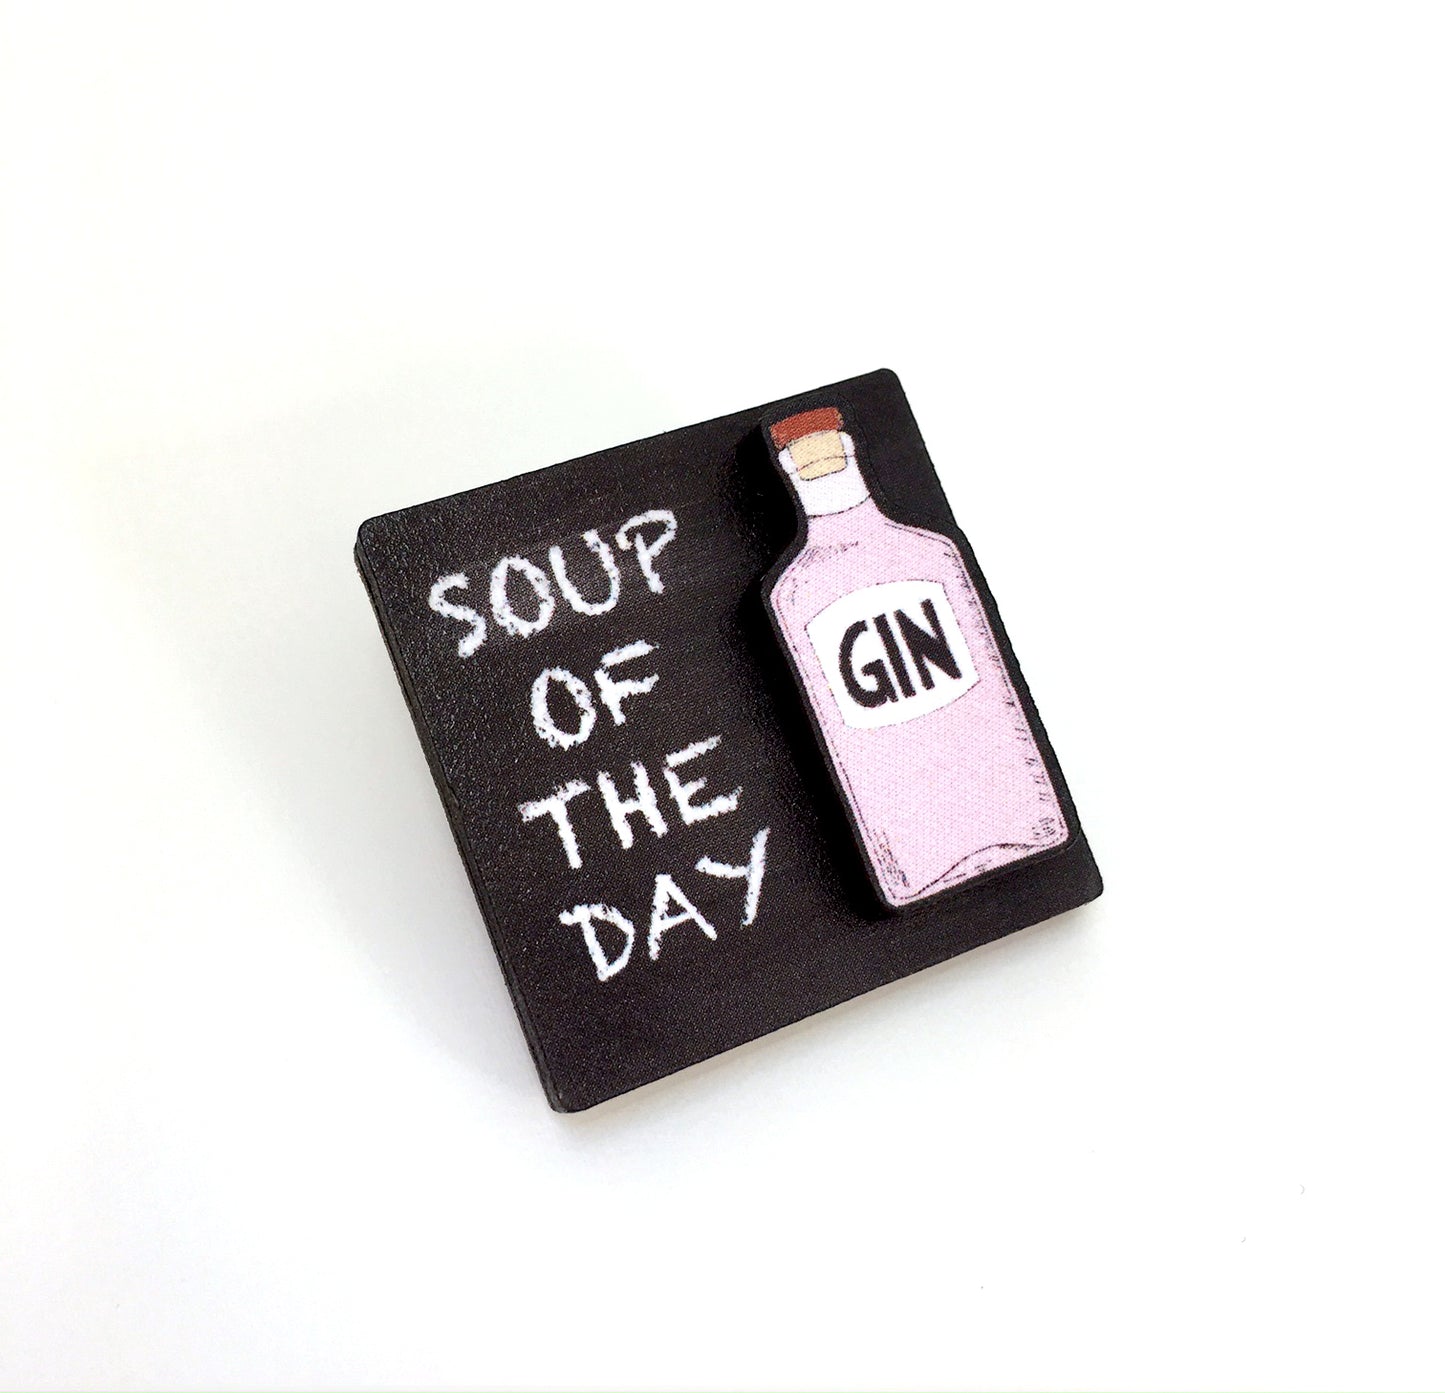 Quirky gin brooch - Gin lover gift